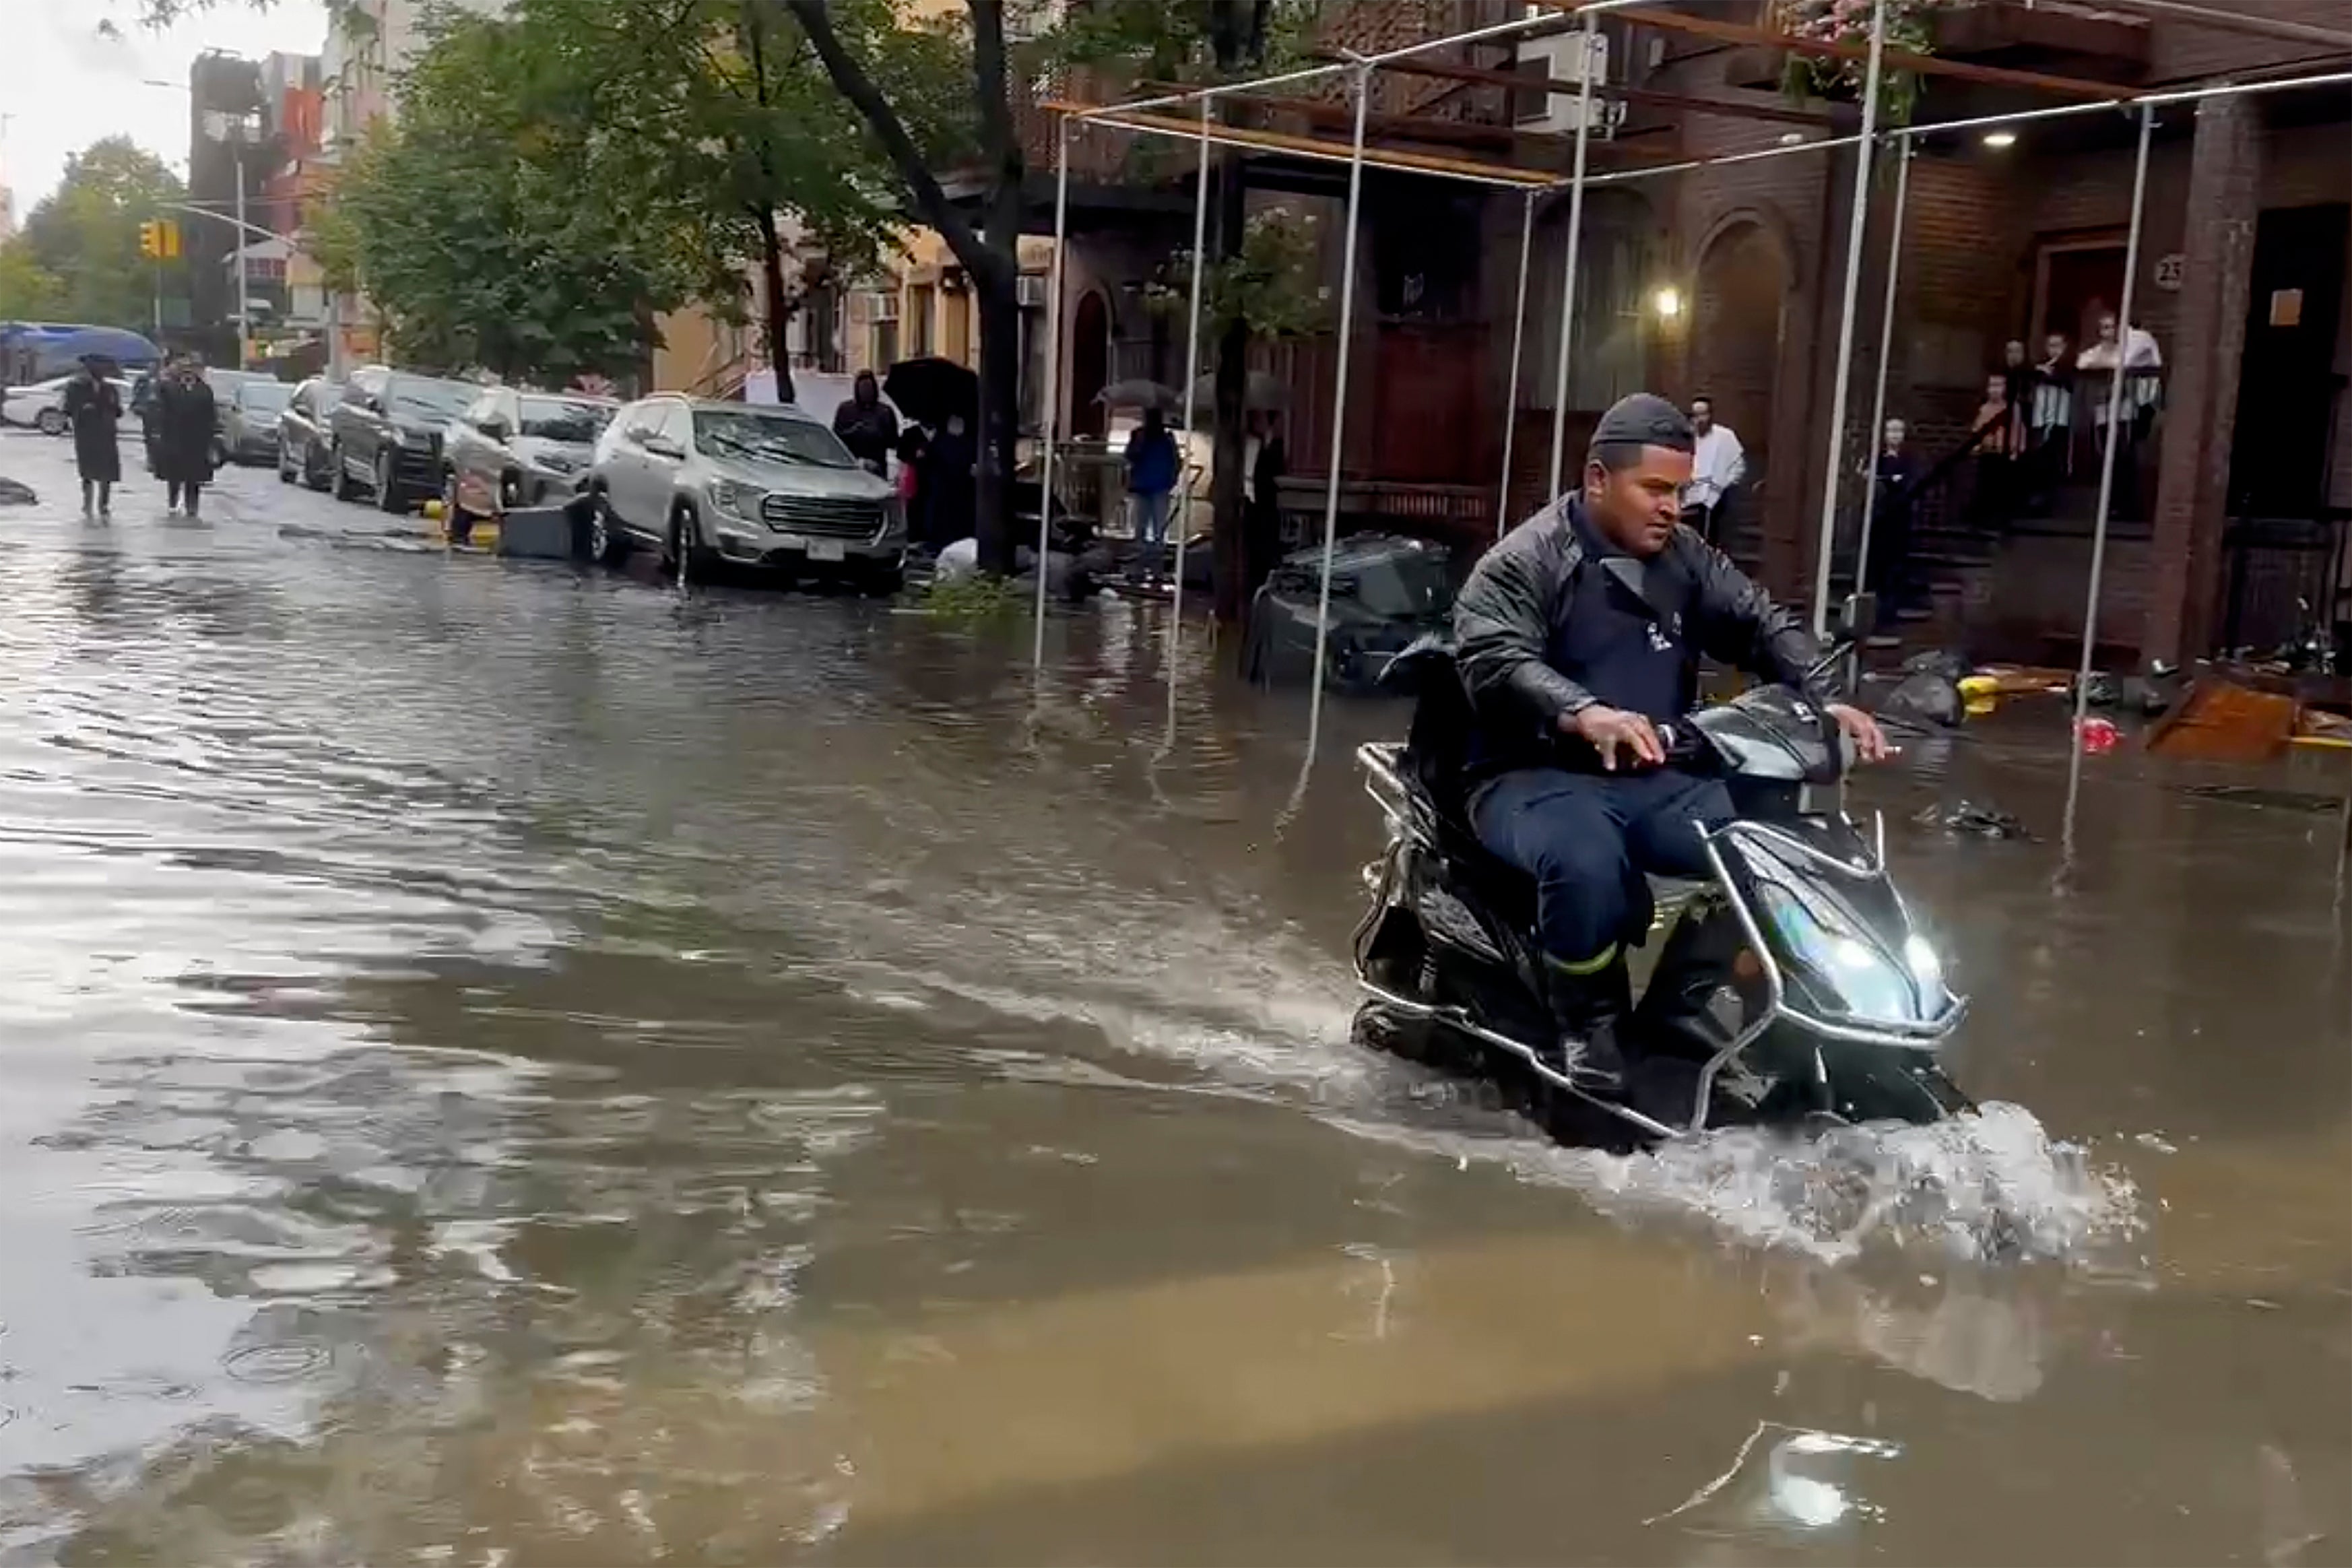 A man drives a scooter through flood waters last Friday in Brooklyn, New York